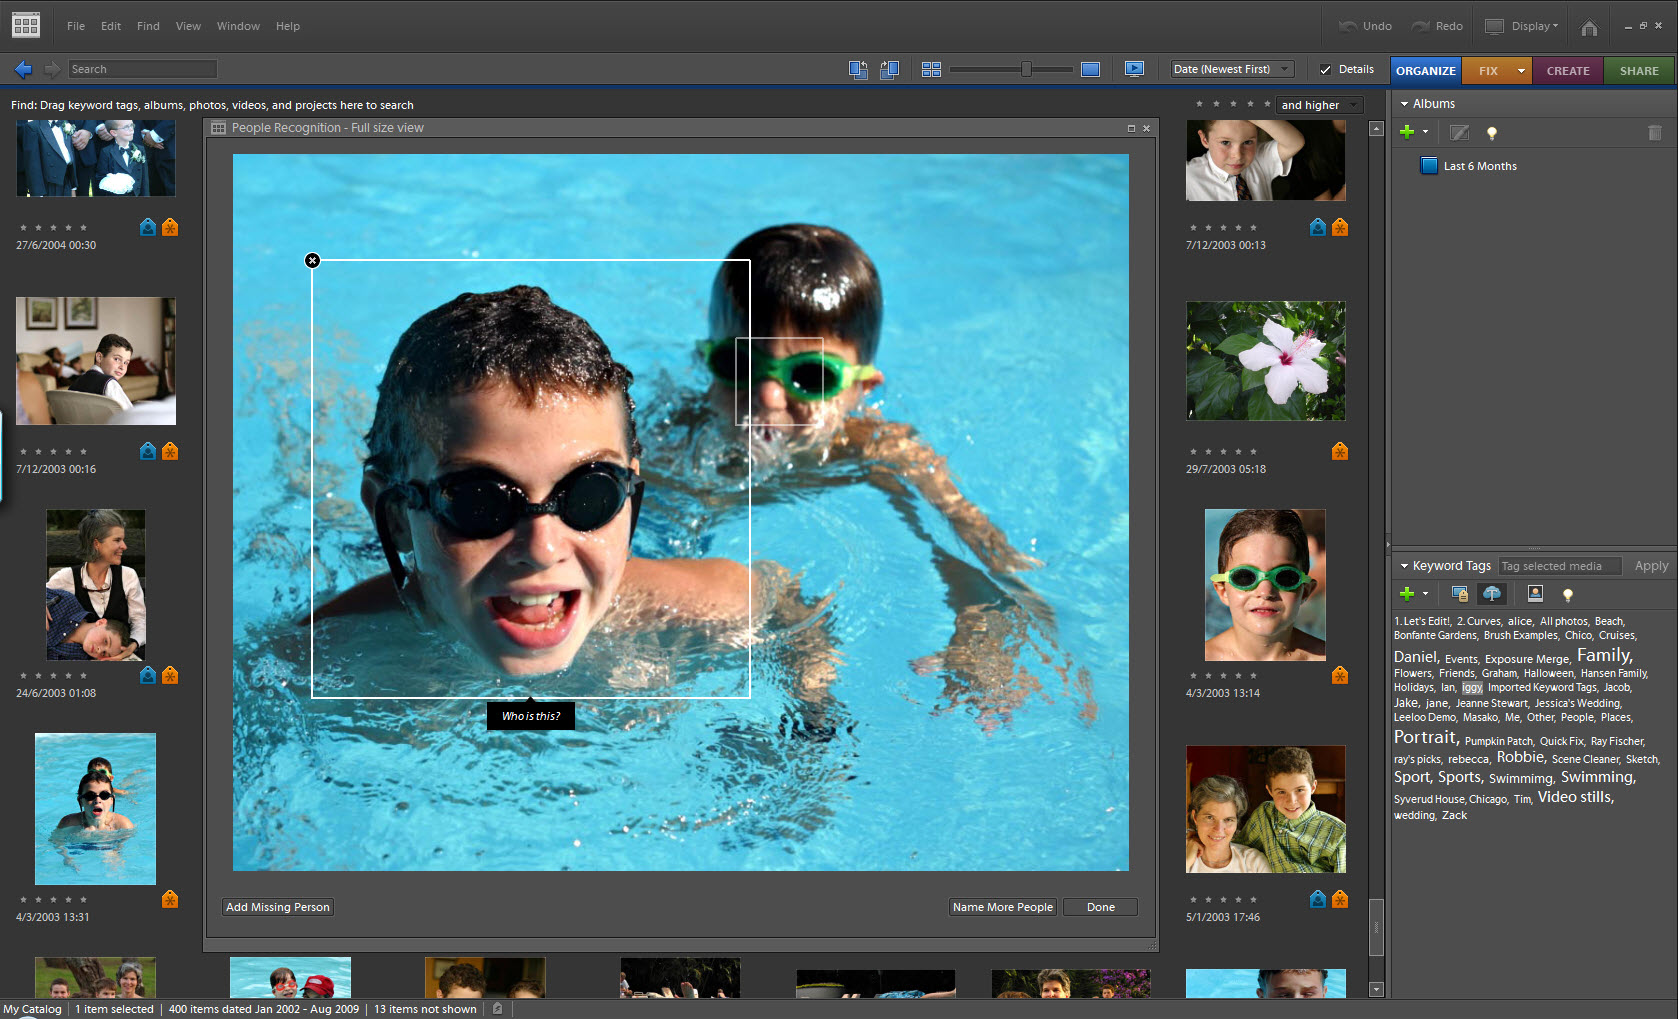 Adobe Photoshop Elements 8 review